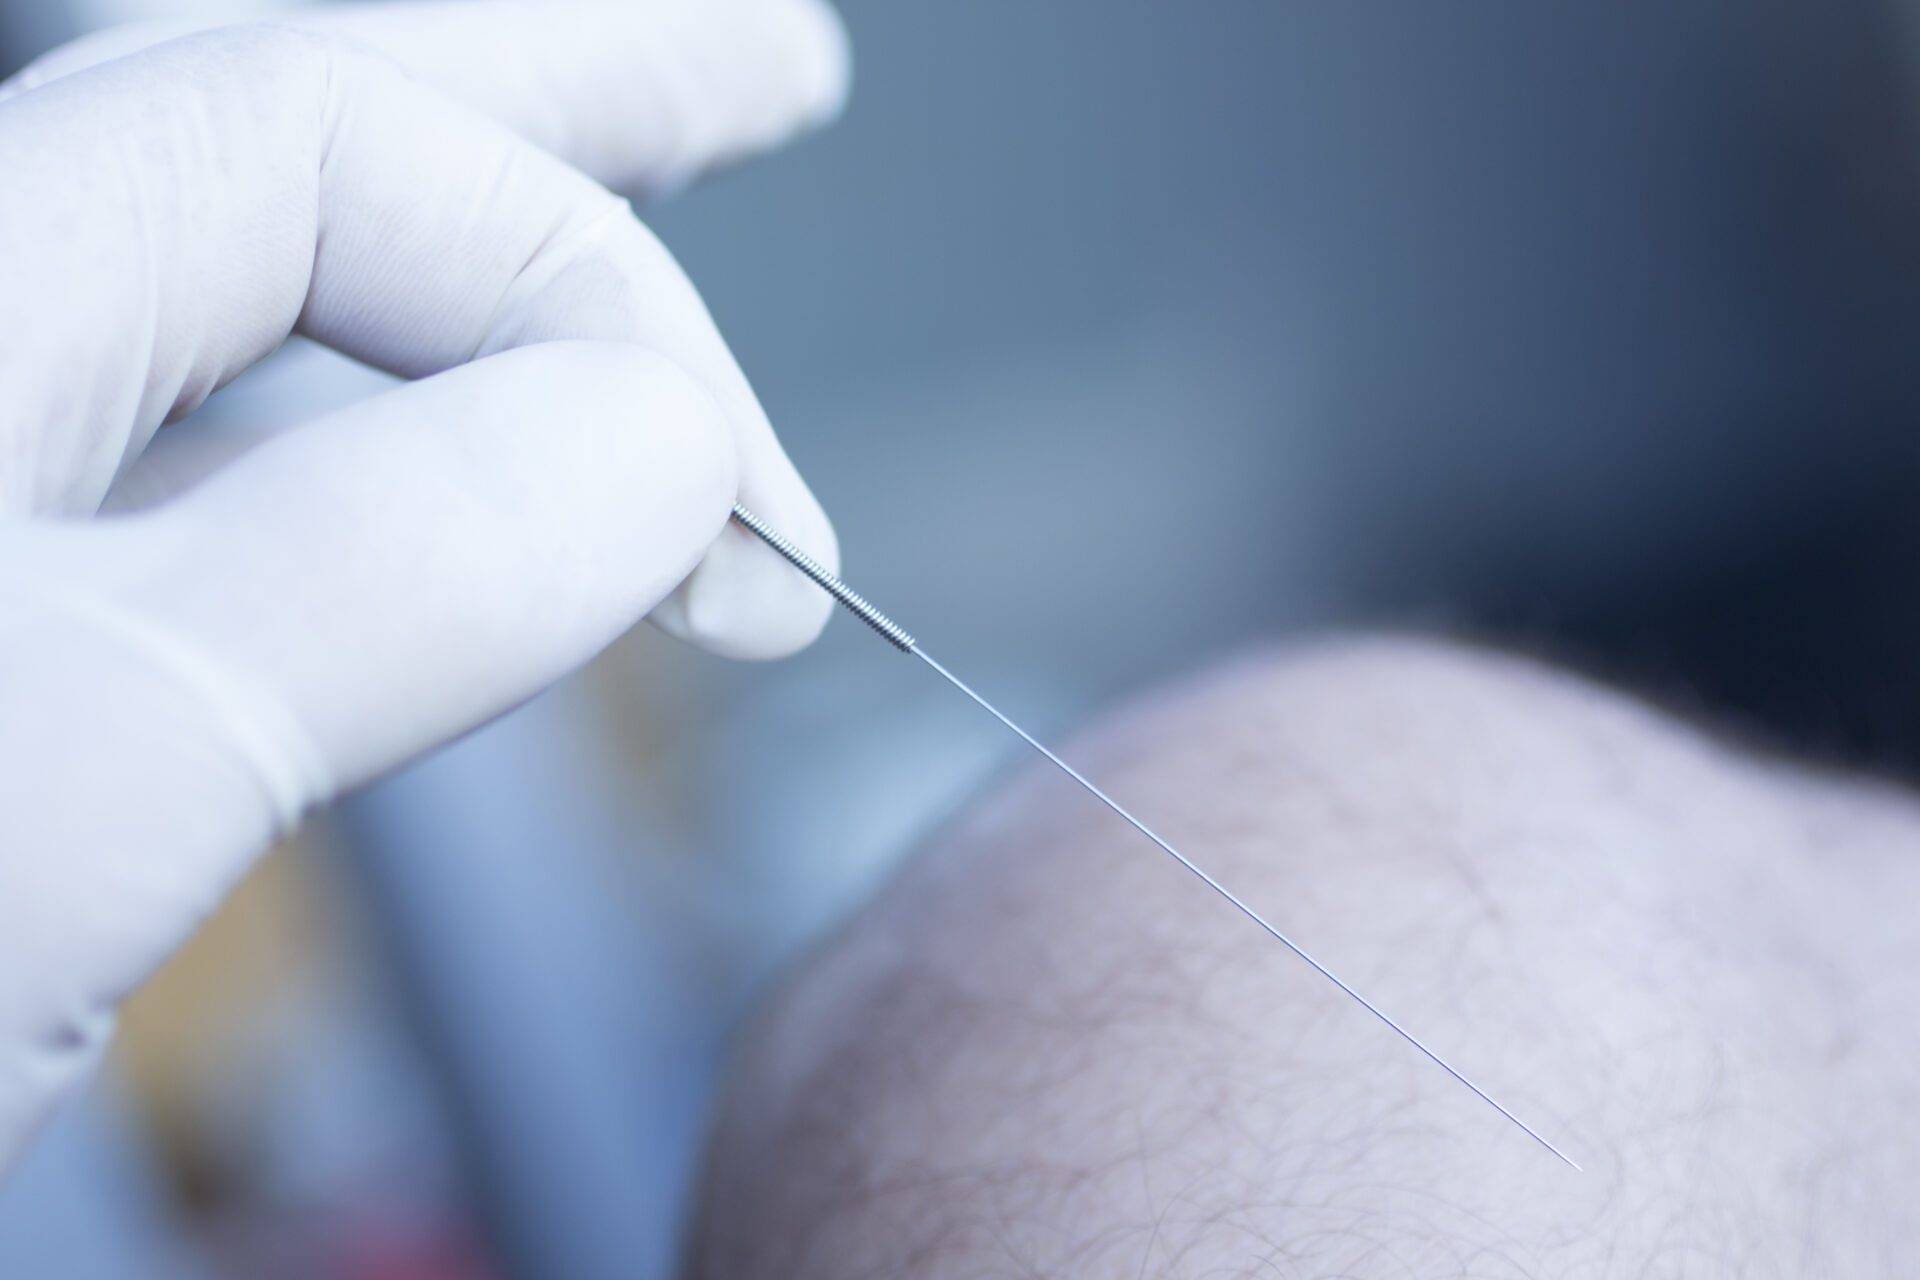 Acupuncture needle used for dry needling rehabilitation medical treament for physiotherapy and pain due to physical injury in the hand of the doctor.